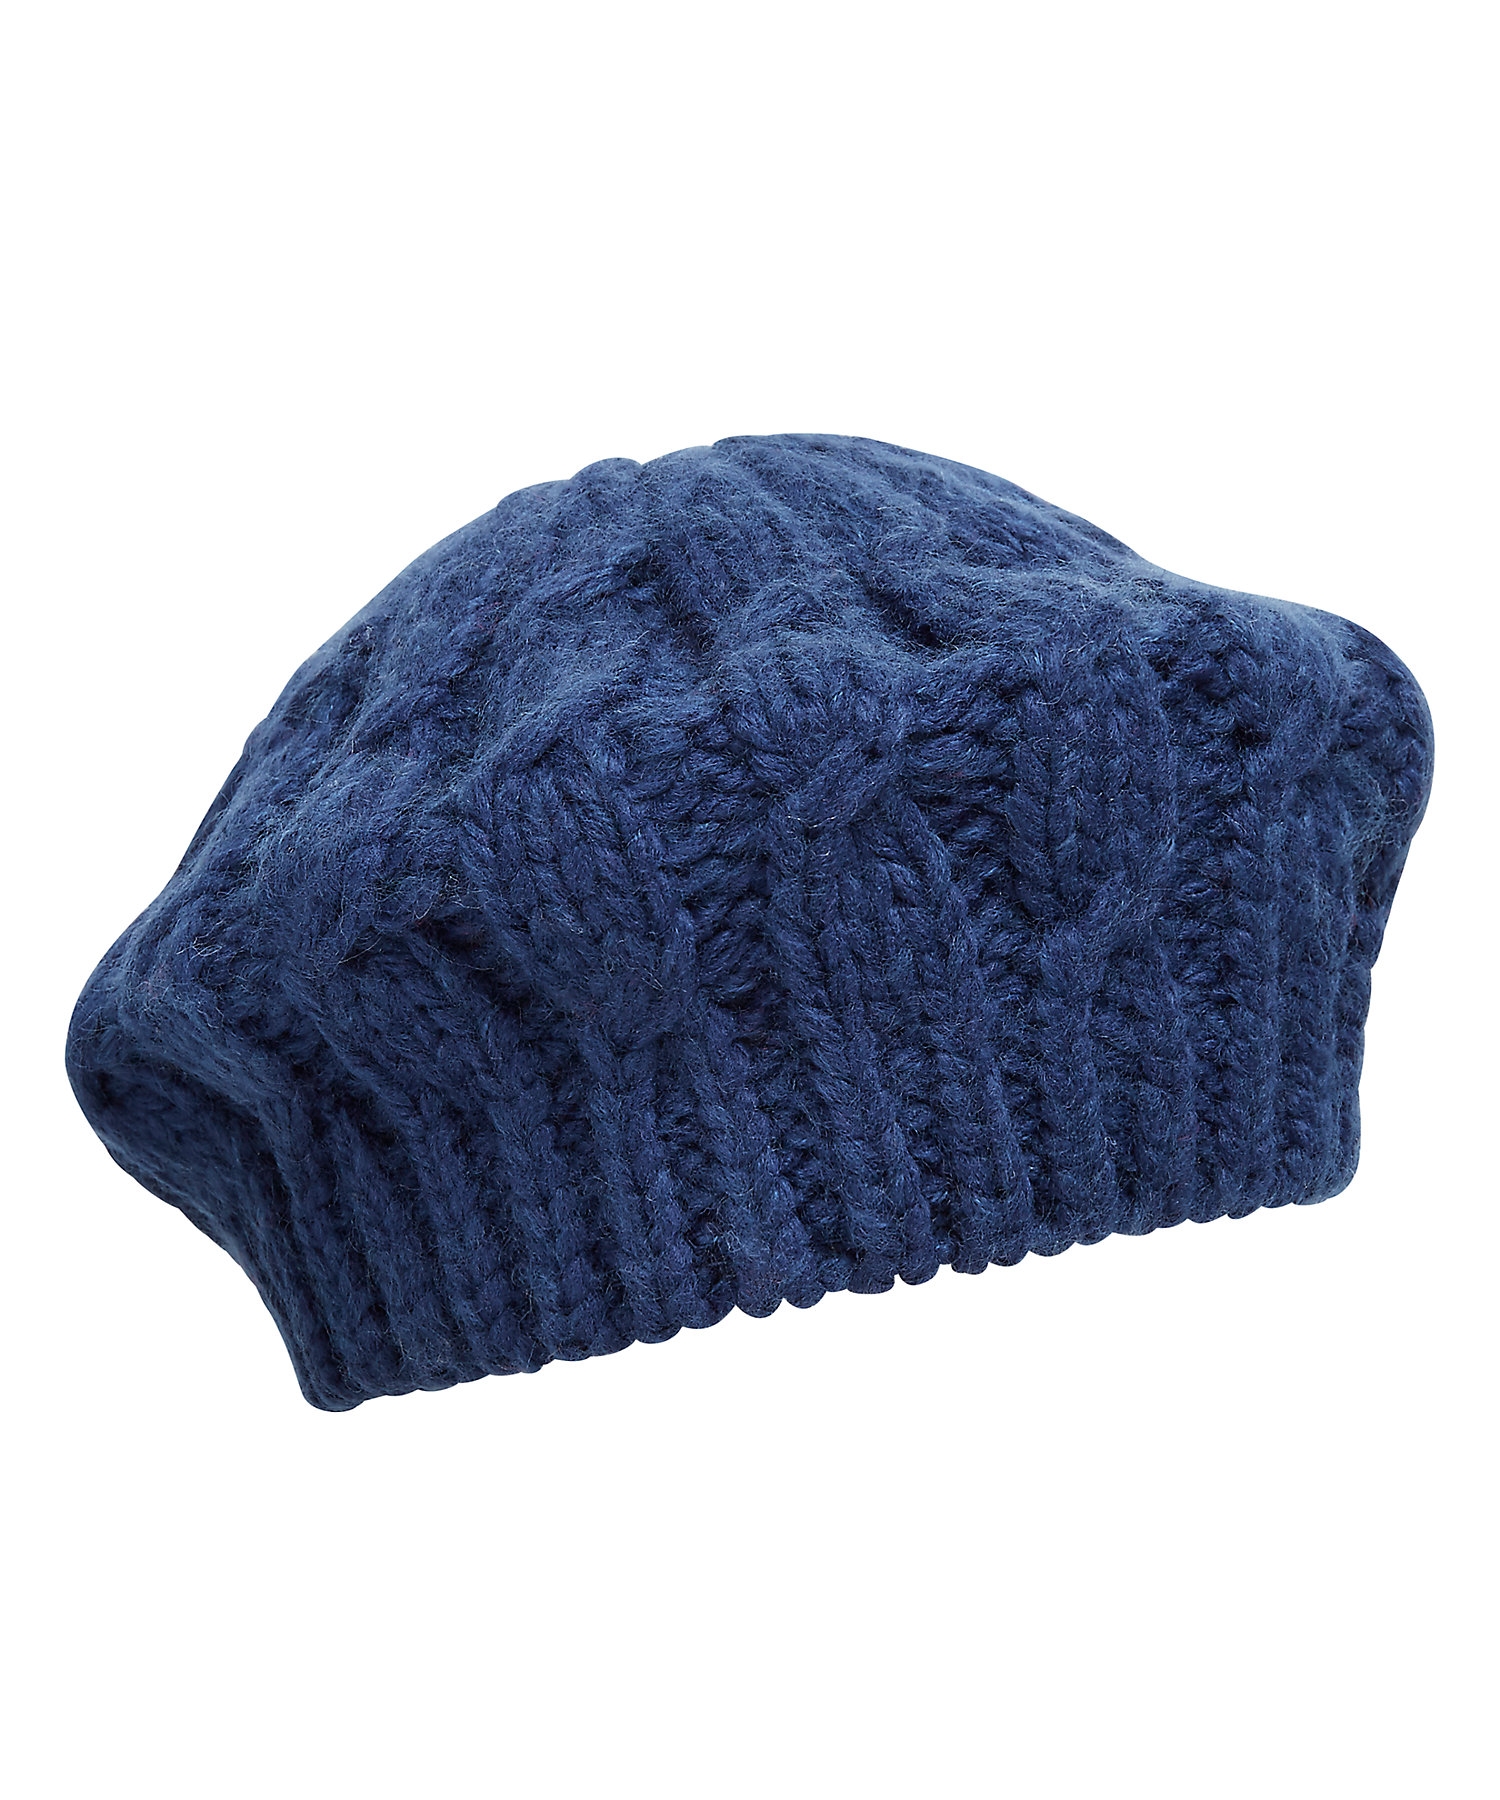 Mothercare | Girls Beanie Cable Knit - Navy 0